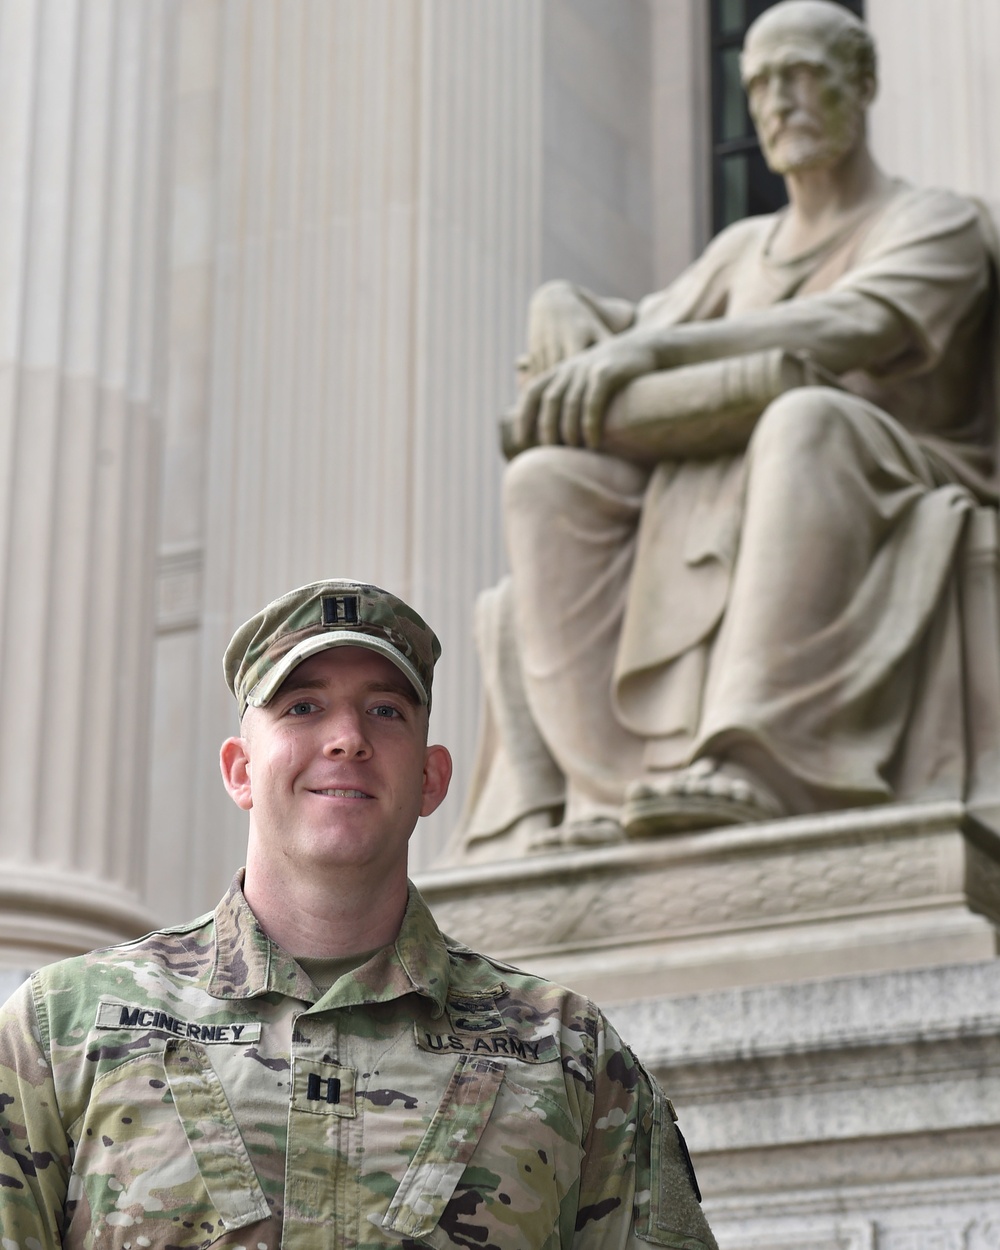 Army Captain McInerney supports the 58th Presidential Inauguration